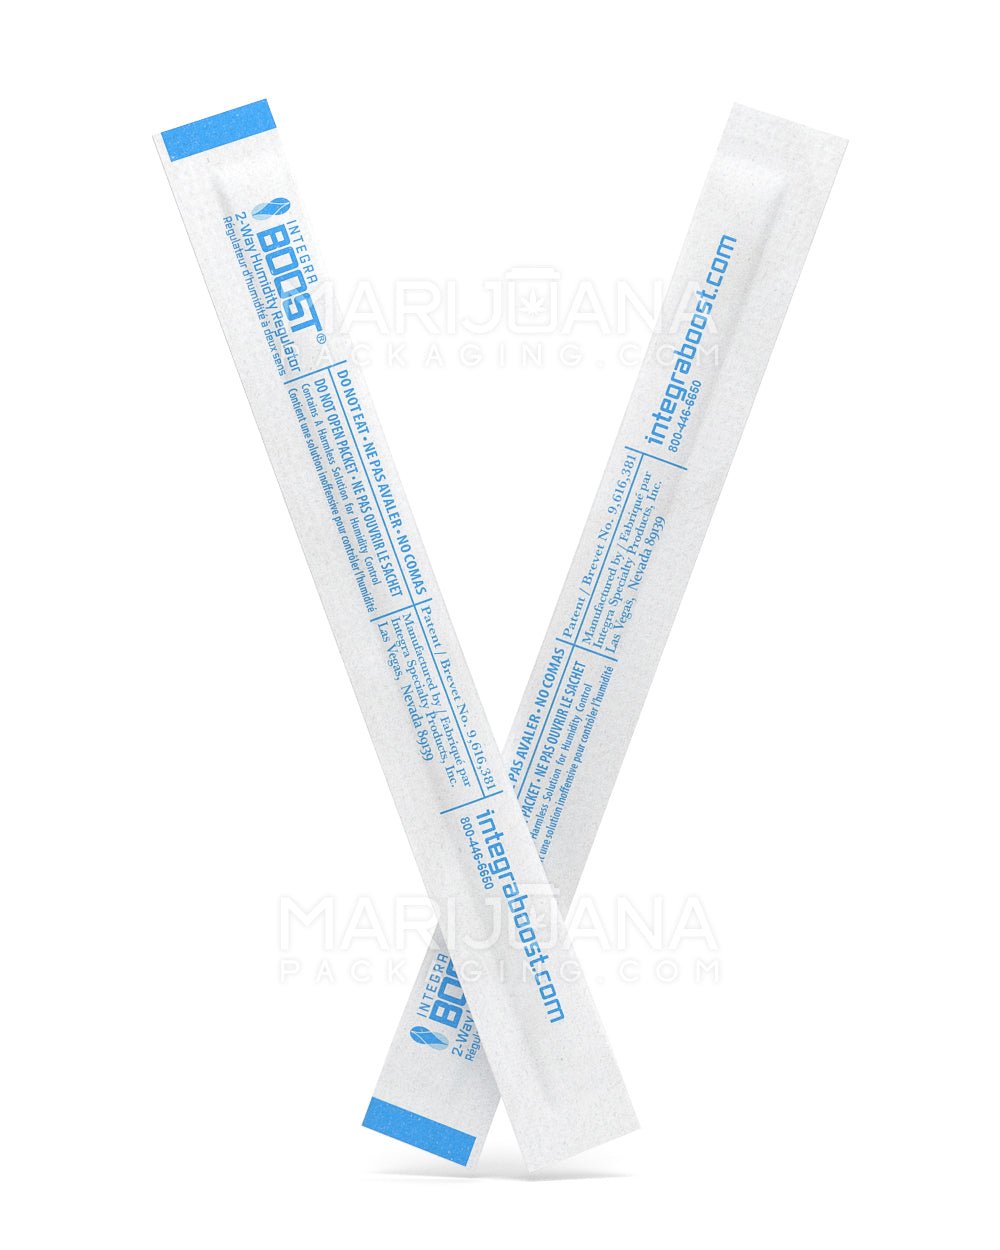 INTEGRA | Boost Pre-Roll Humidity Packs | 110mm - 55% - 100 Count - 3